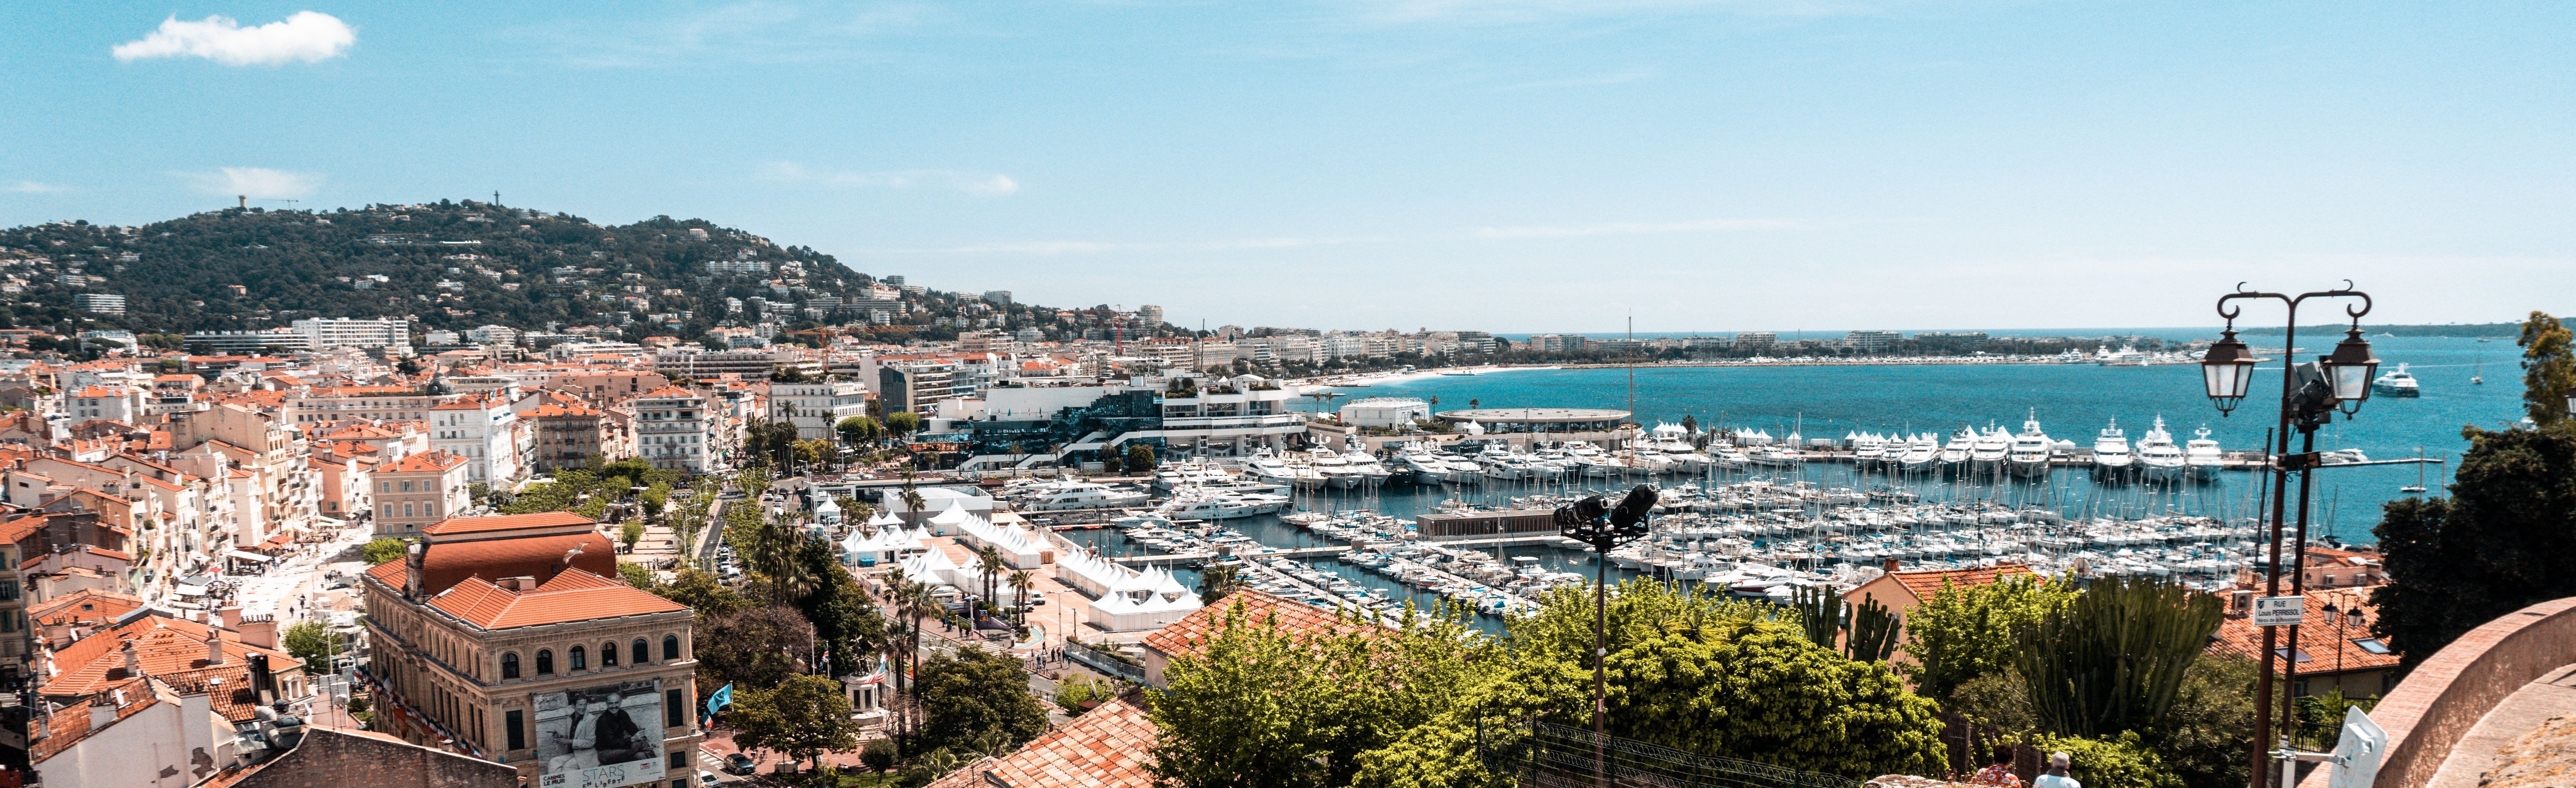 Meet SI Partners in France at the Cannes Lions Festival of Creativity